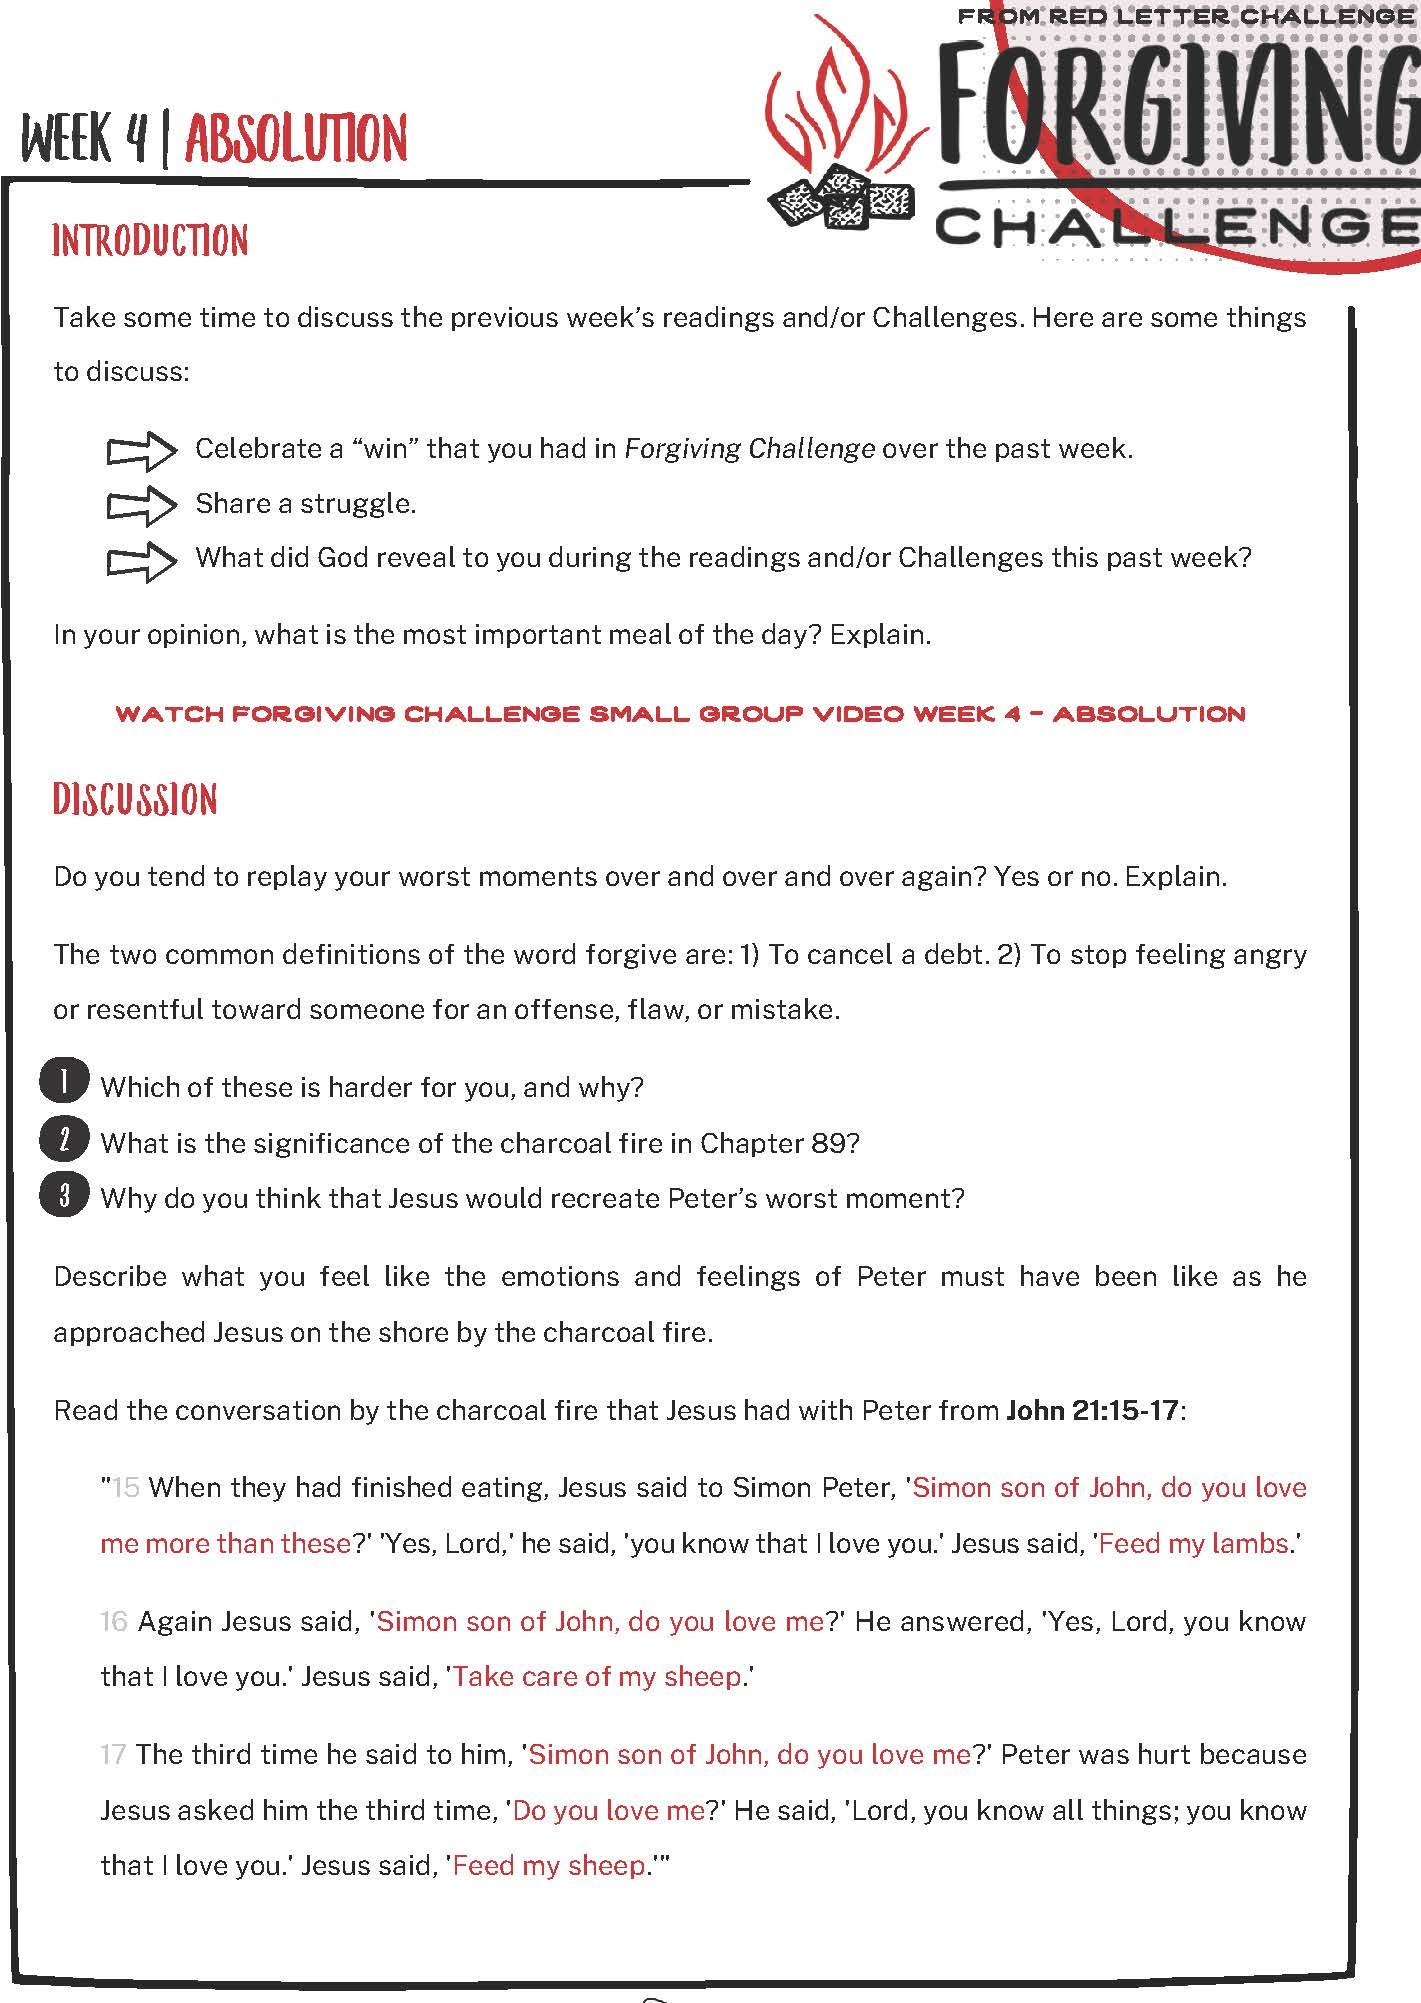 Forgiving Challenge Adult Small Group Discussion Guides_Page_13.jpg